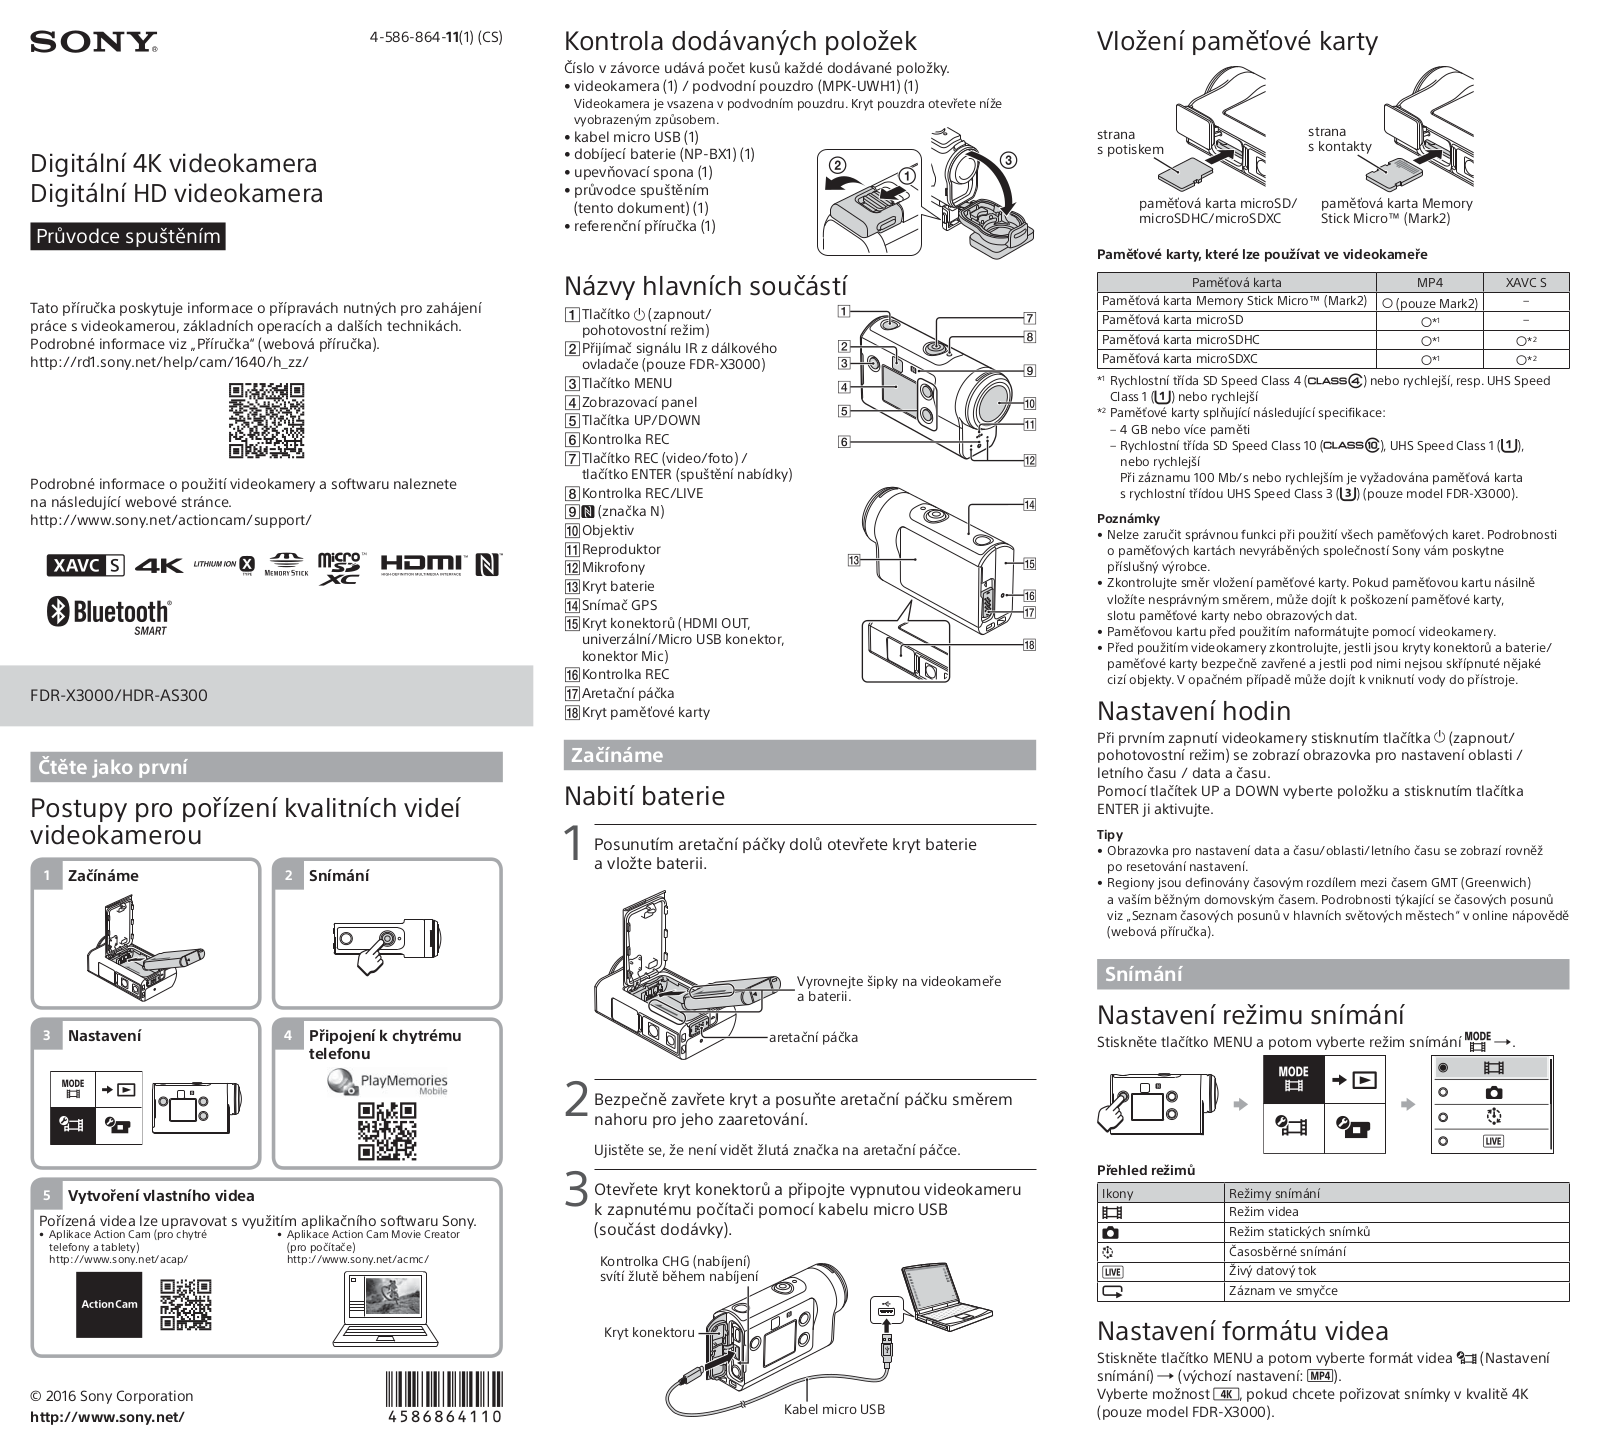 Sony FDR-X3000, HDR-AS300 User Manual